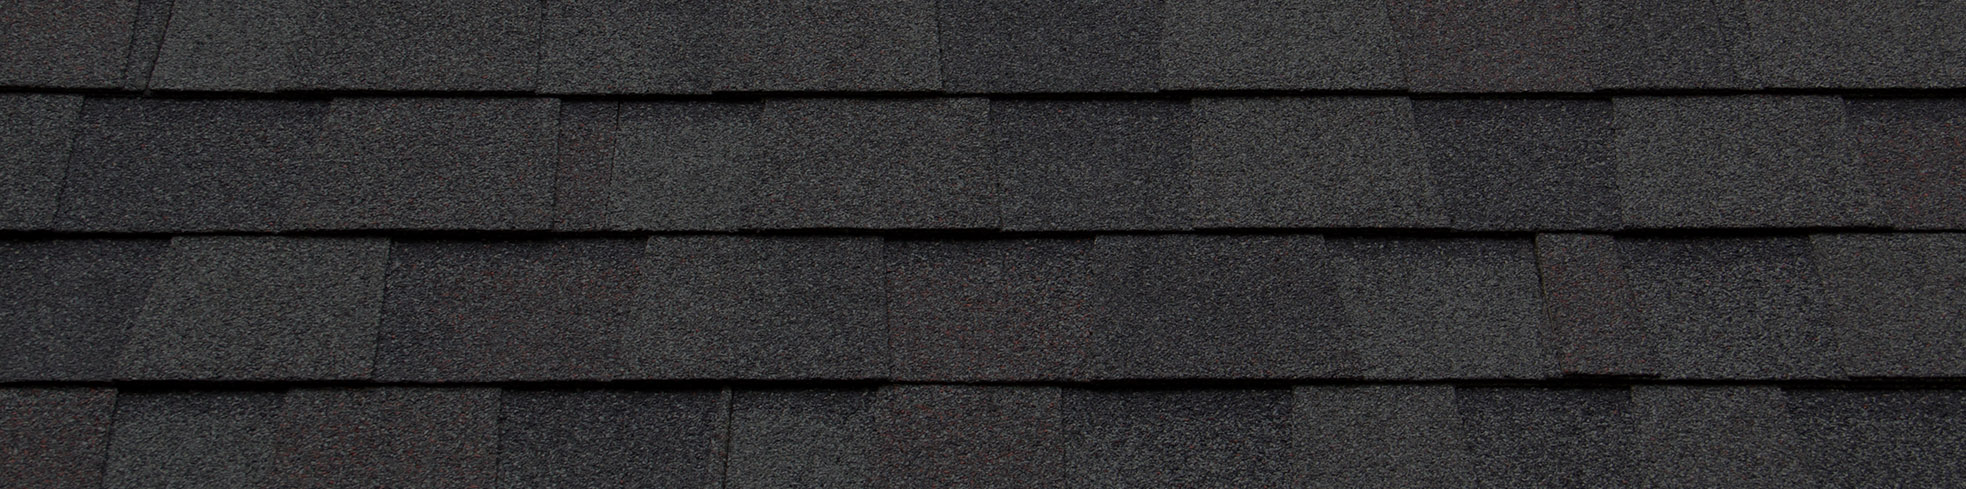 Residential roof installation in Milwaukee is easy and affordable with Infinity